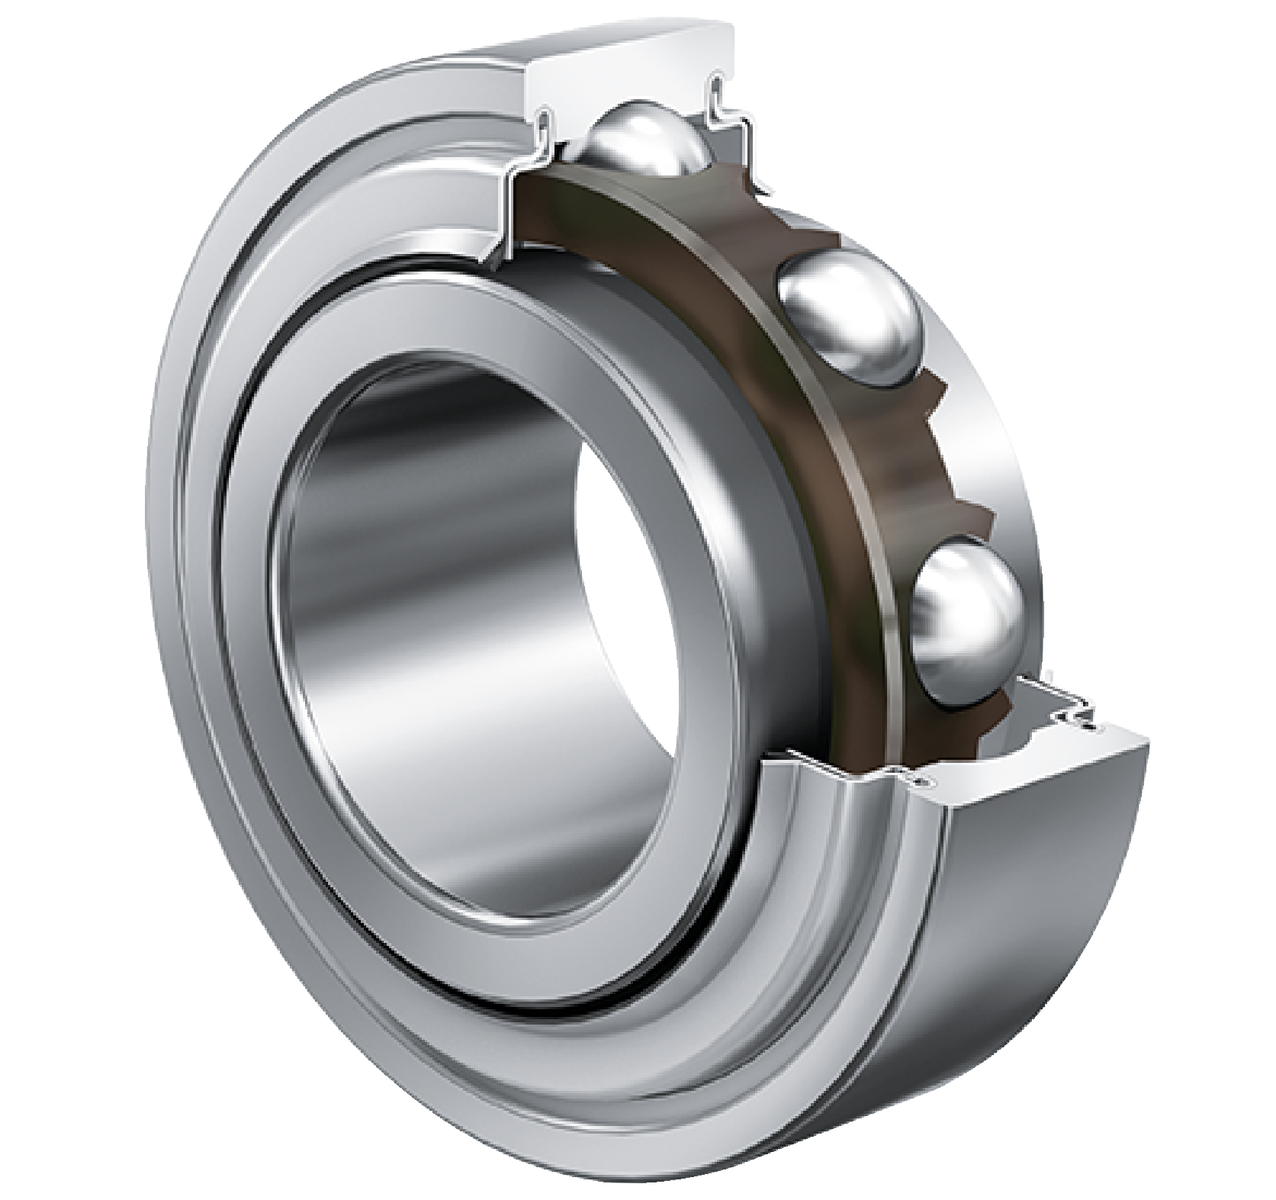 Radial Insert Ball Bearing 2..-KRR, Cylindrical Outer Ring, Inner Ring for Fit, R Seals on Both Sides 203-XL-KRR-AH02